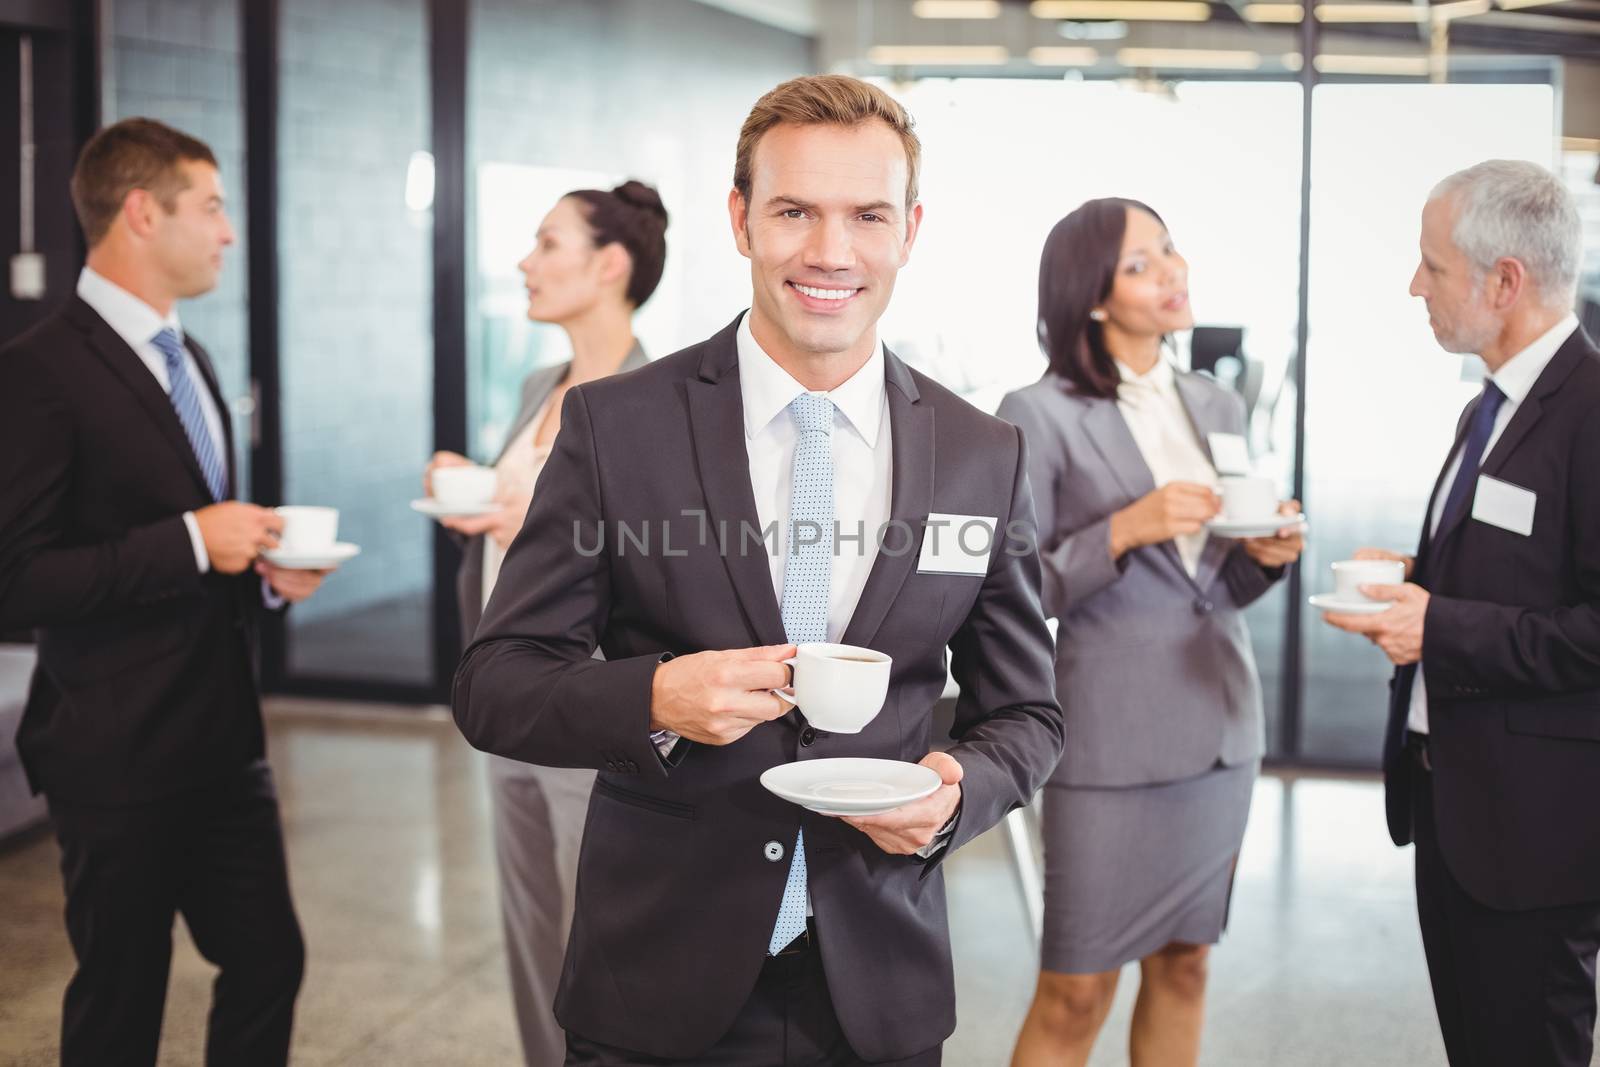 Portrait of businessman having tea during break time and his team interacting in background